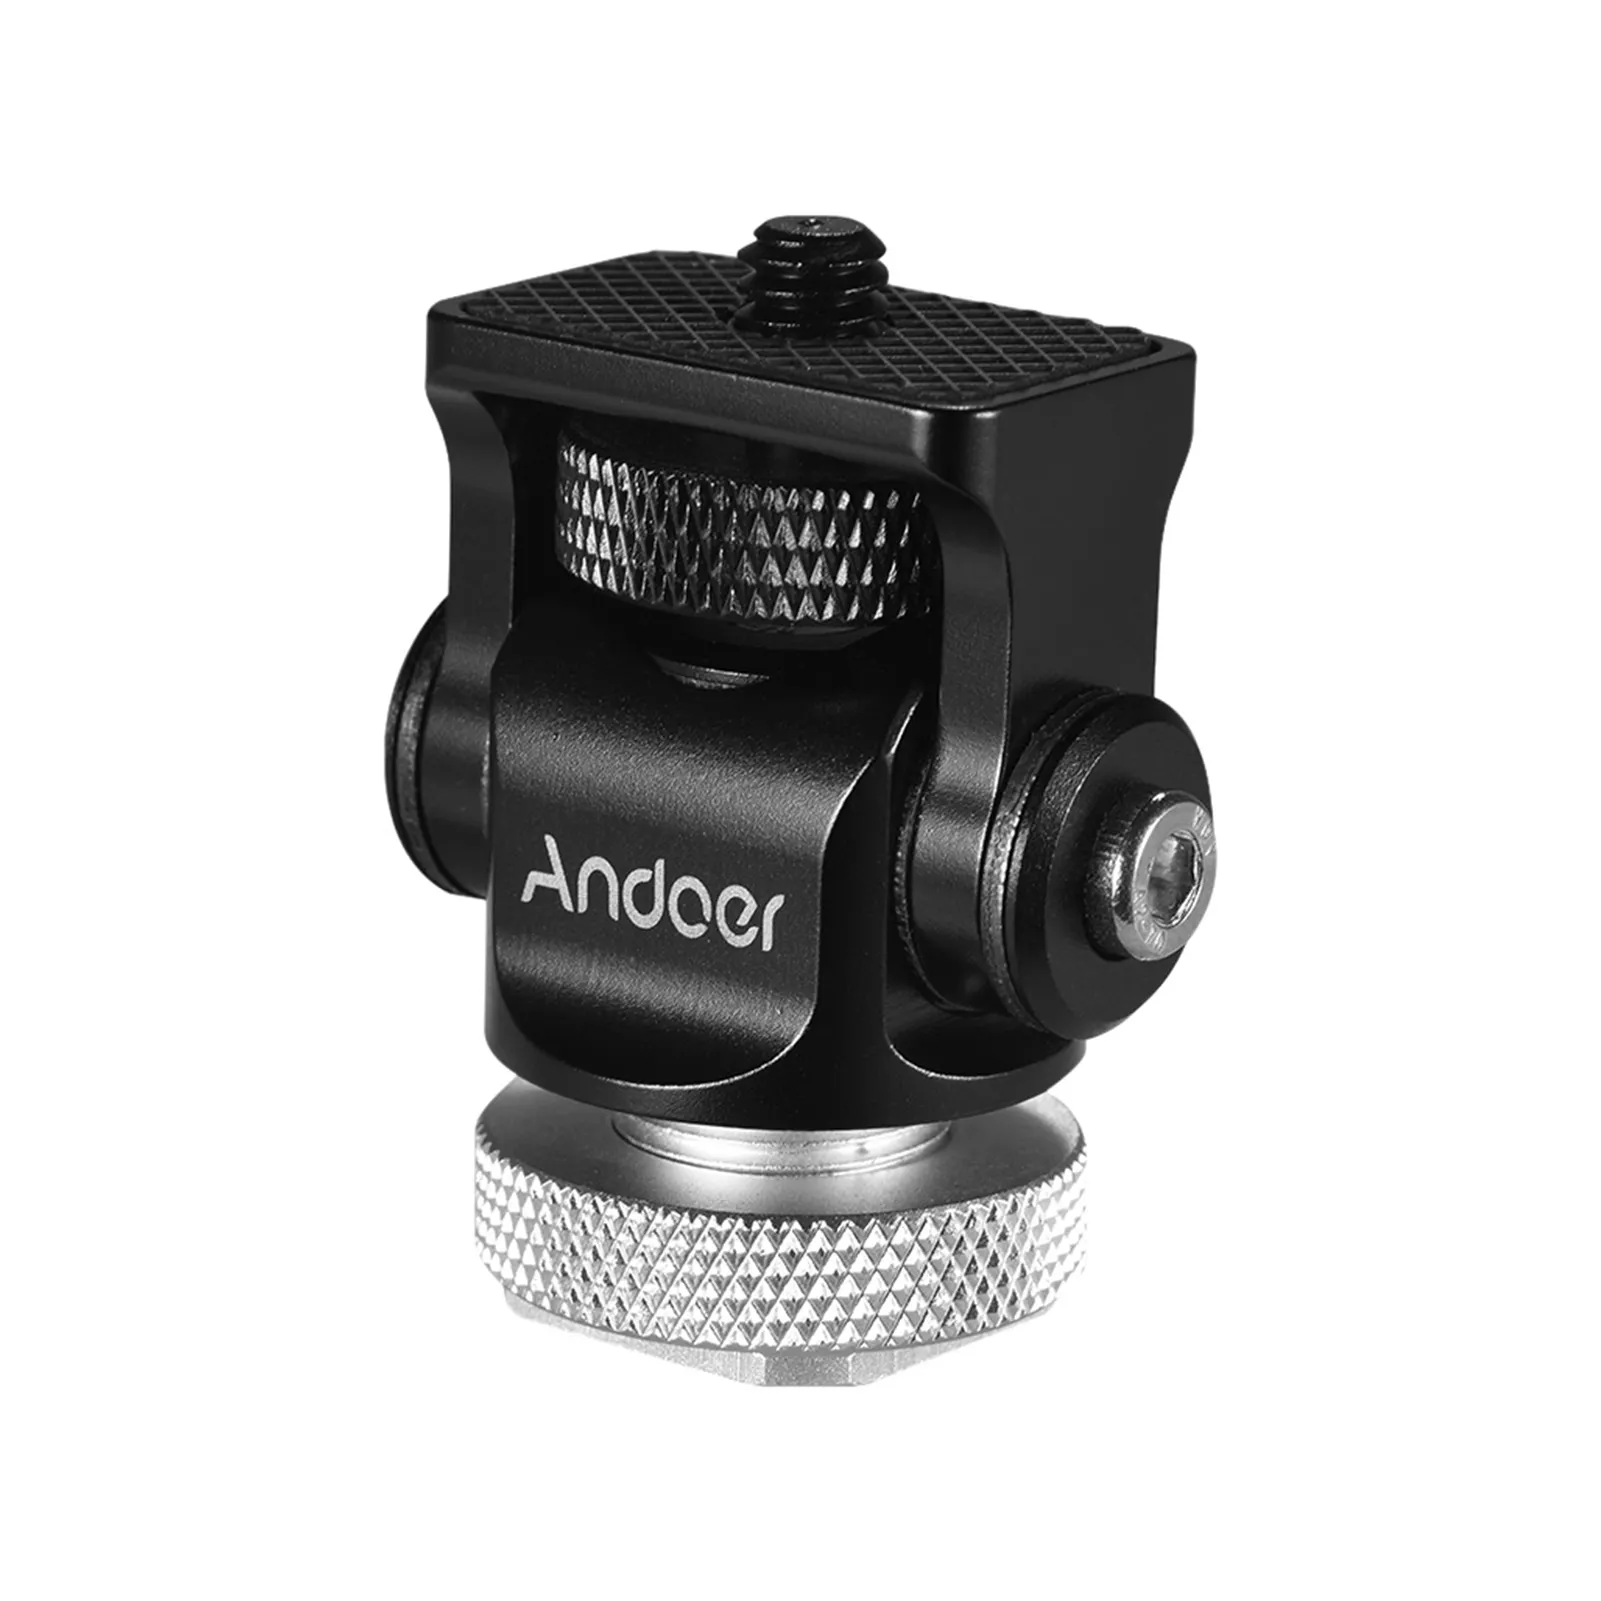 180 Degree Rotary Mini Ball Head Hot Flash Shoe Mount Adapter with 1/4 Inch Screw for DSLR Camera Microphone Tripod Monopod